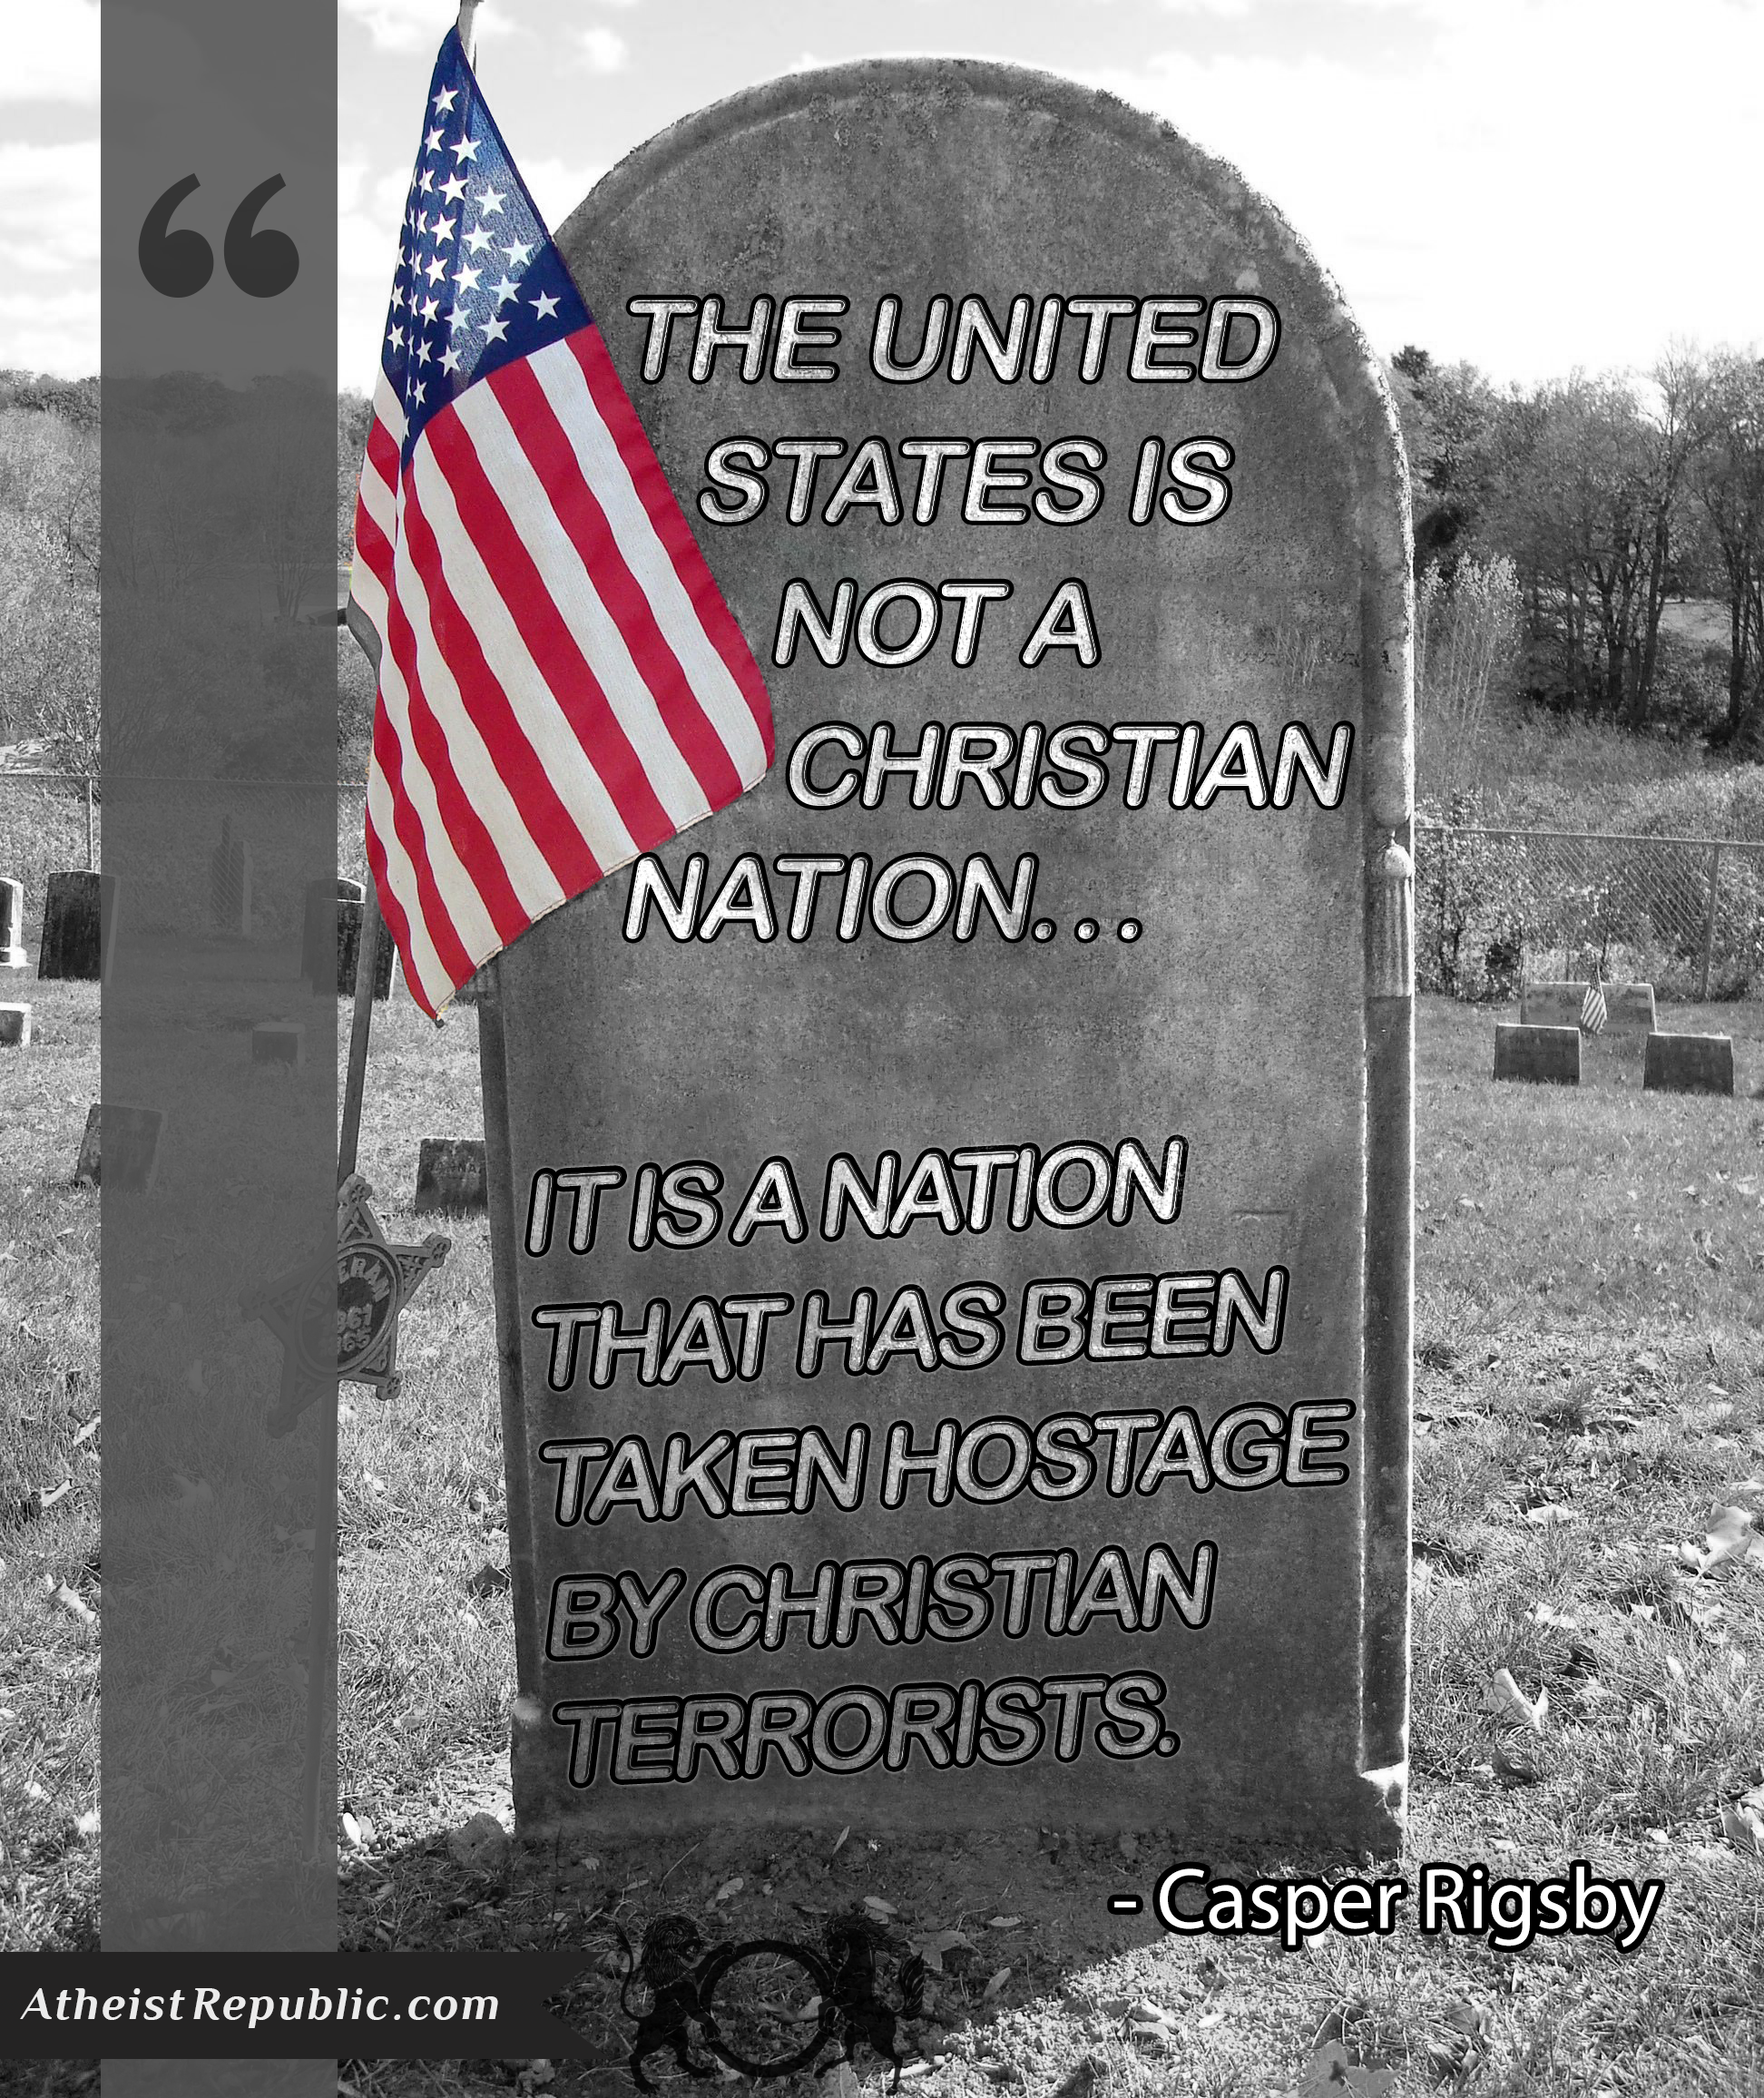 The United States is not a Christian Nation - Casper Rigsby